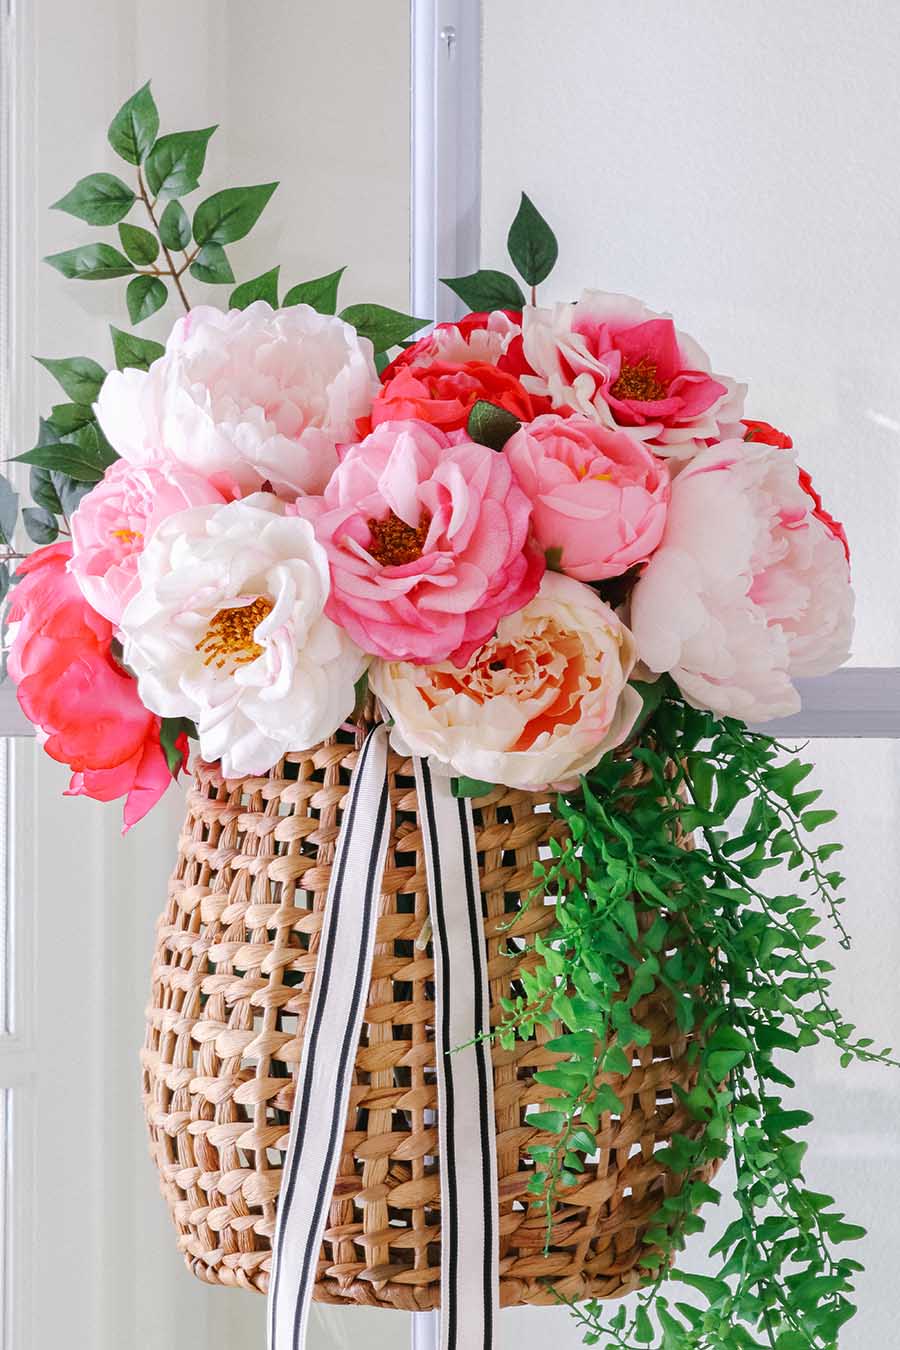 This basket of flowers is a perfect addition to a summer porch. Learn how Ashley from Modern Glam created this summer bouquet. #wreath #diy #crafts